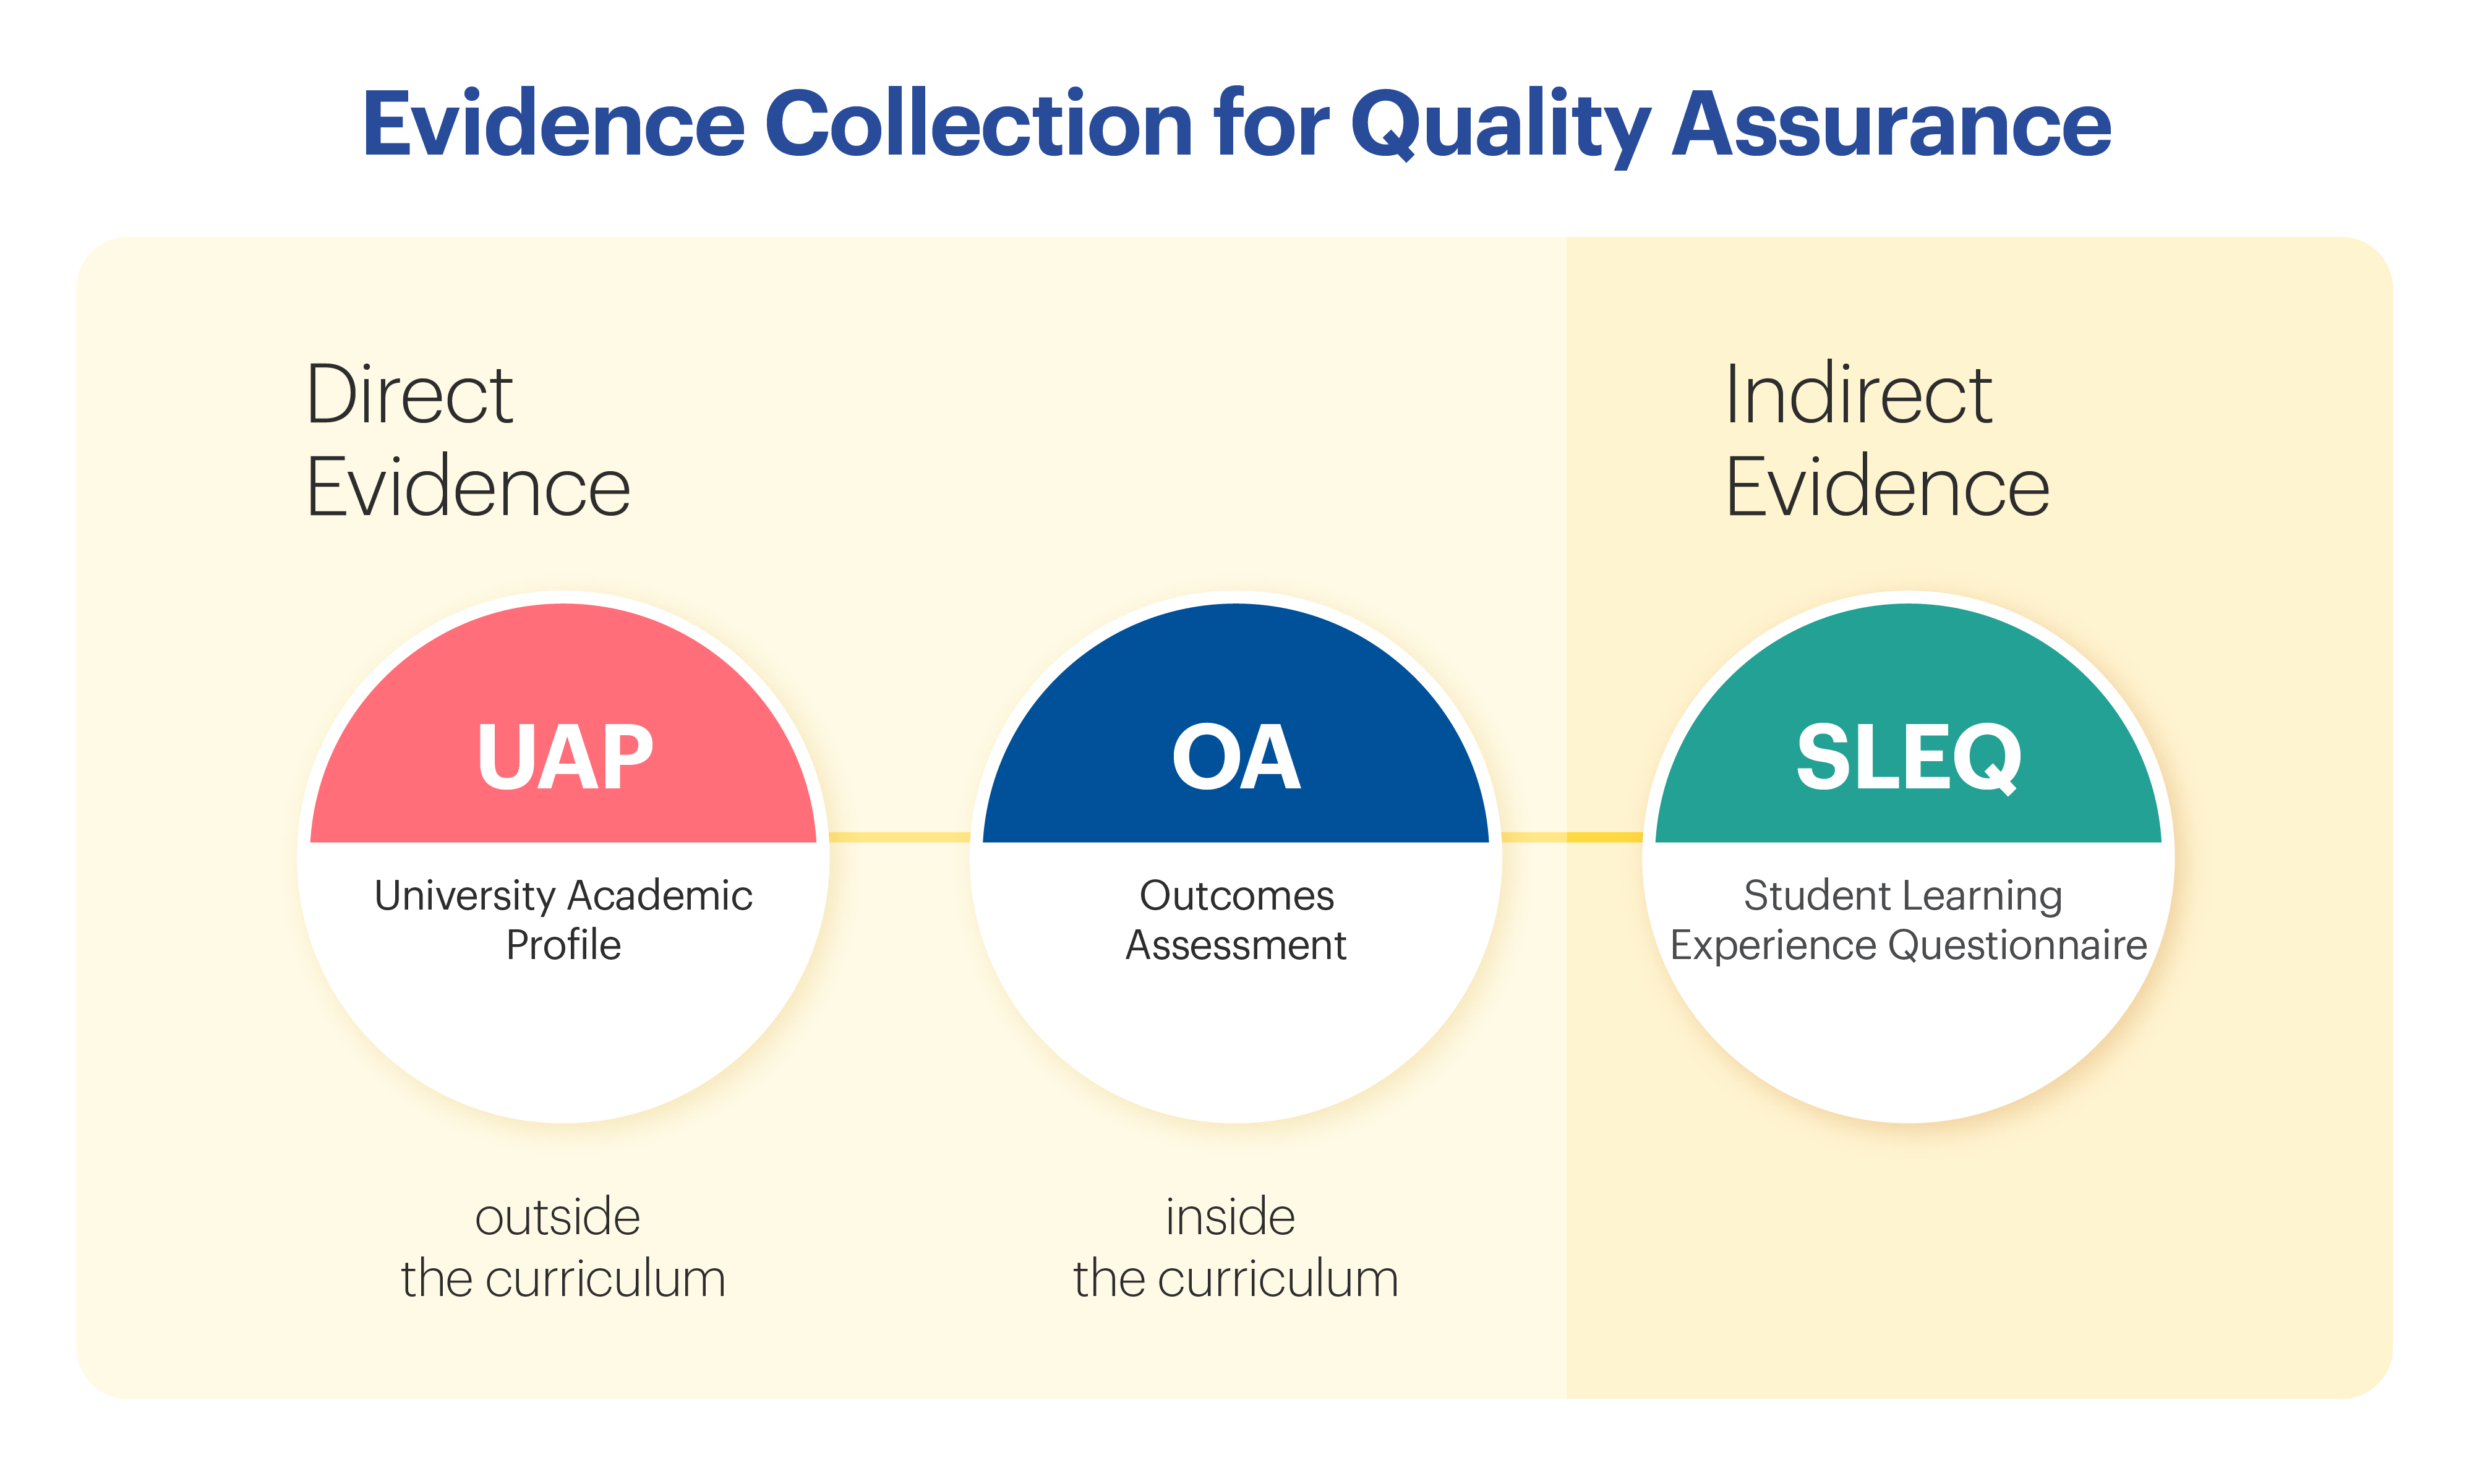 Evidence Collection for Quality Assurance